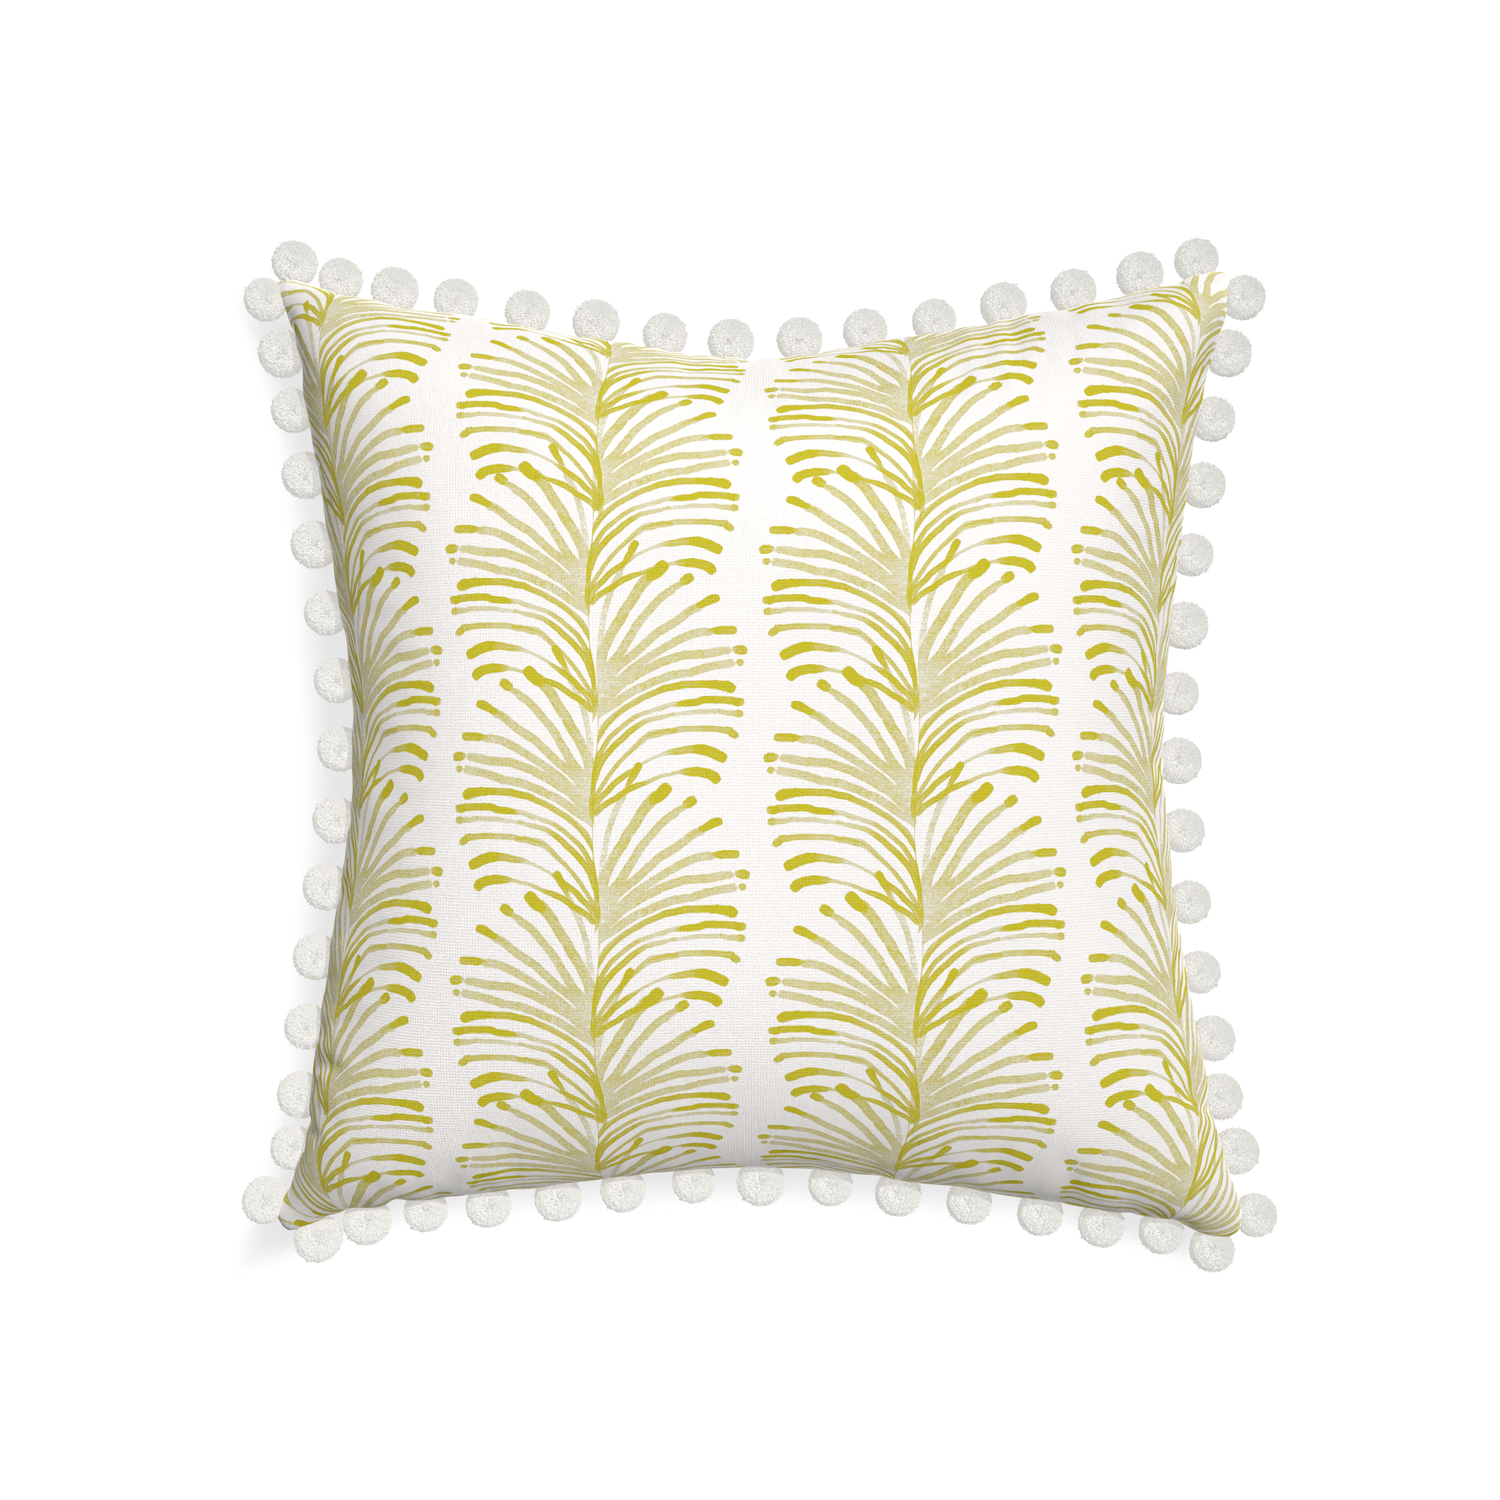 22-square emma chartreuse custom pillow with snow pom pom on white background